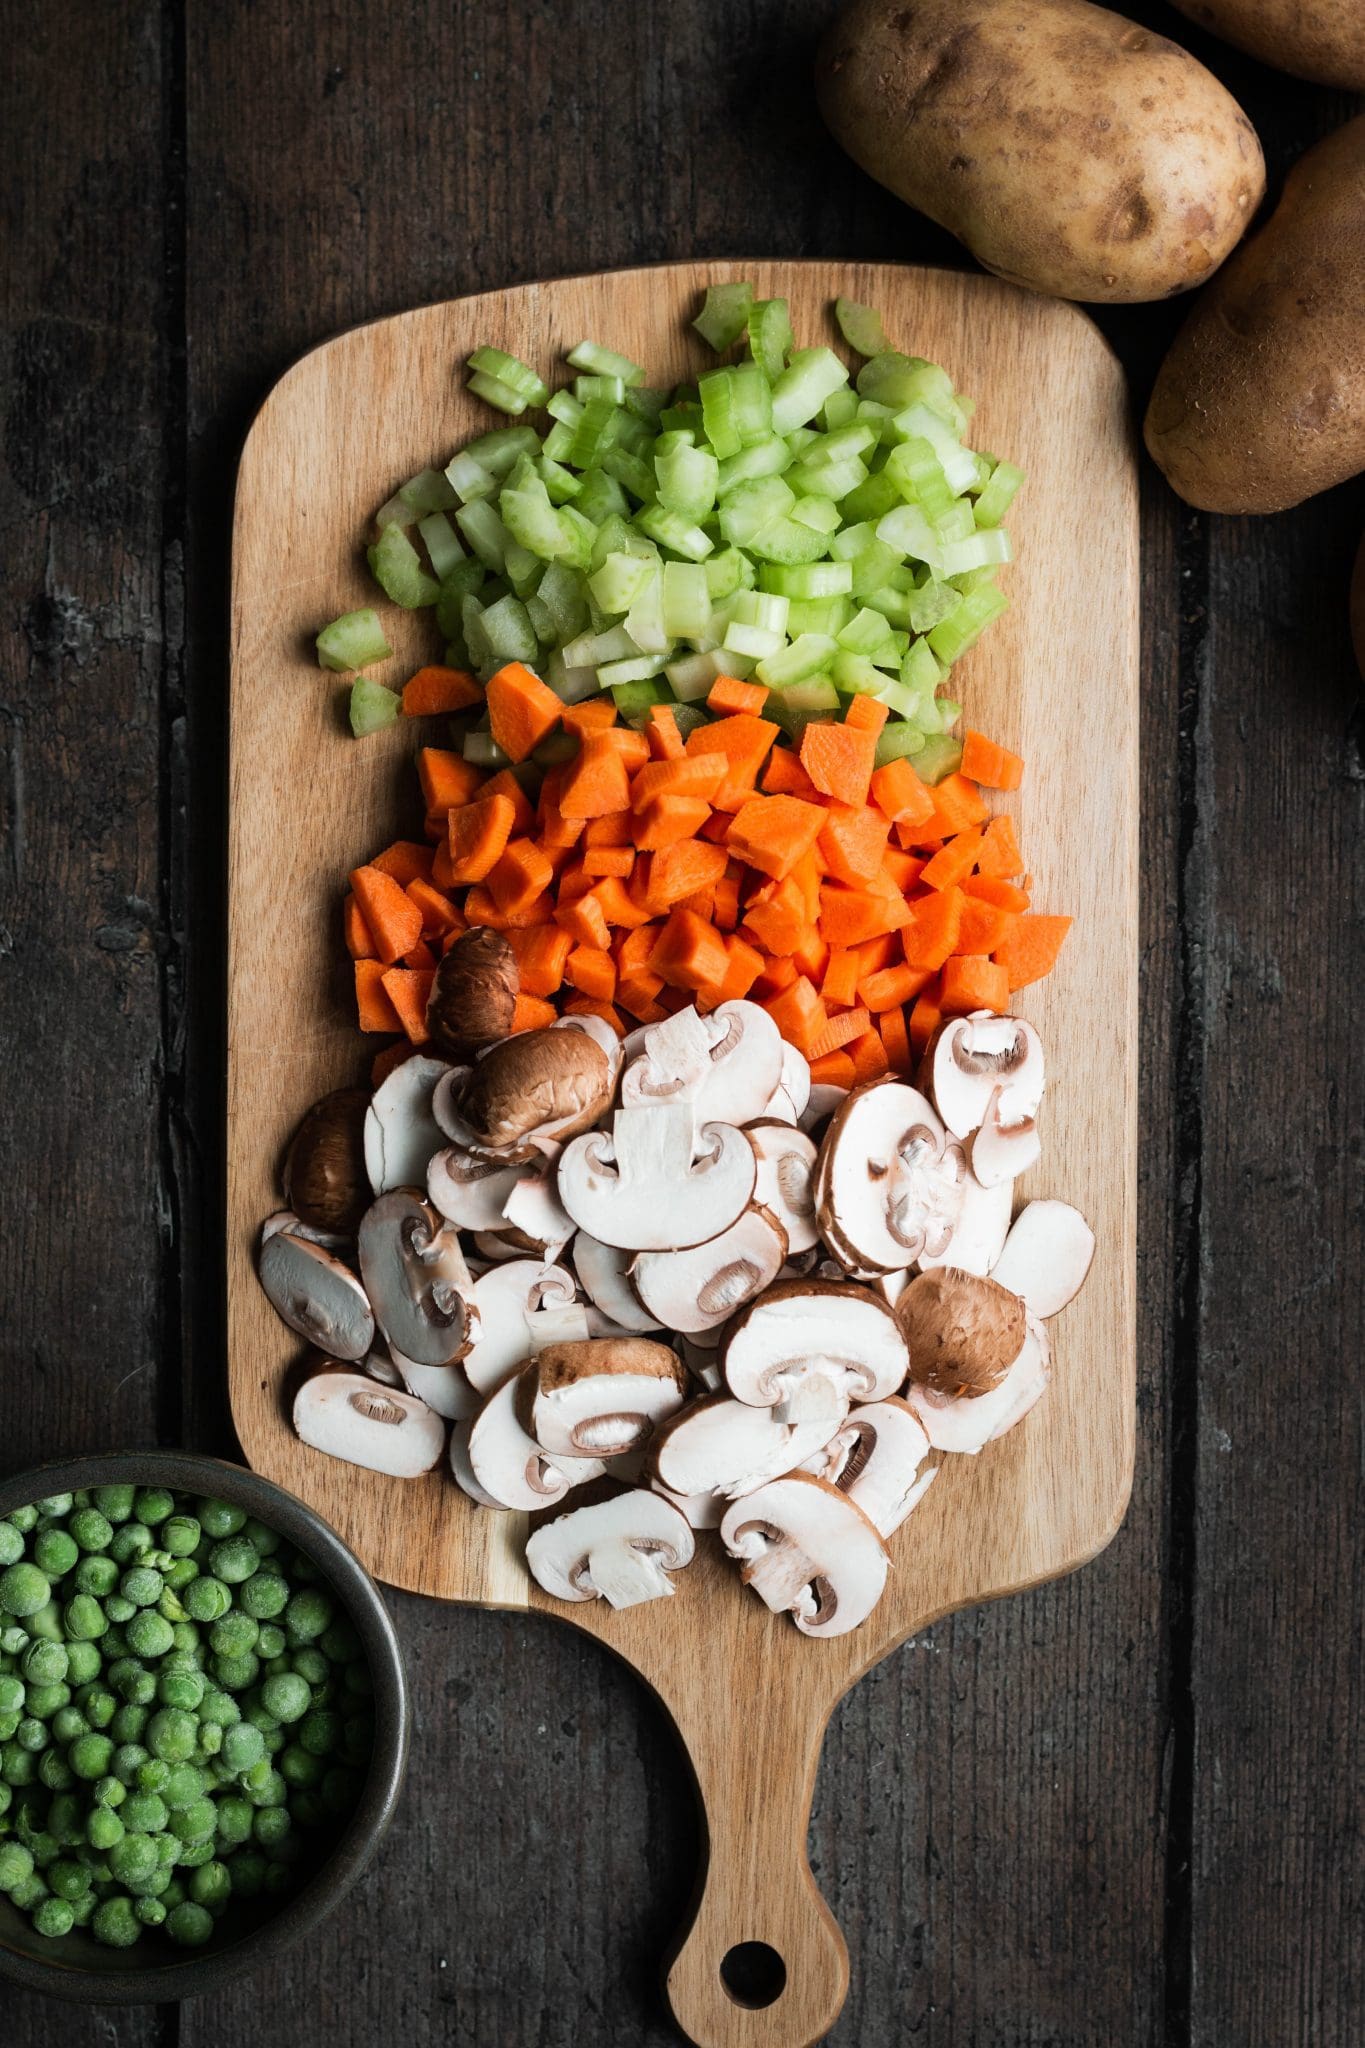 mushrooms, carrots and celery on a cutting board